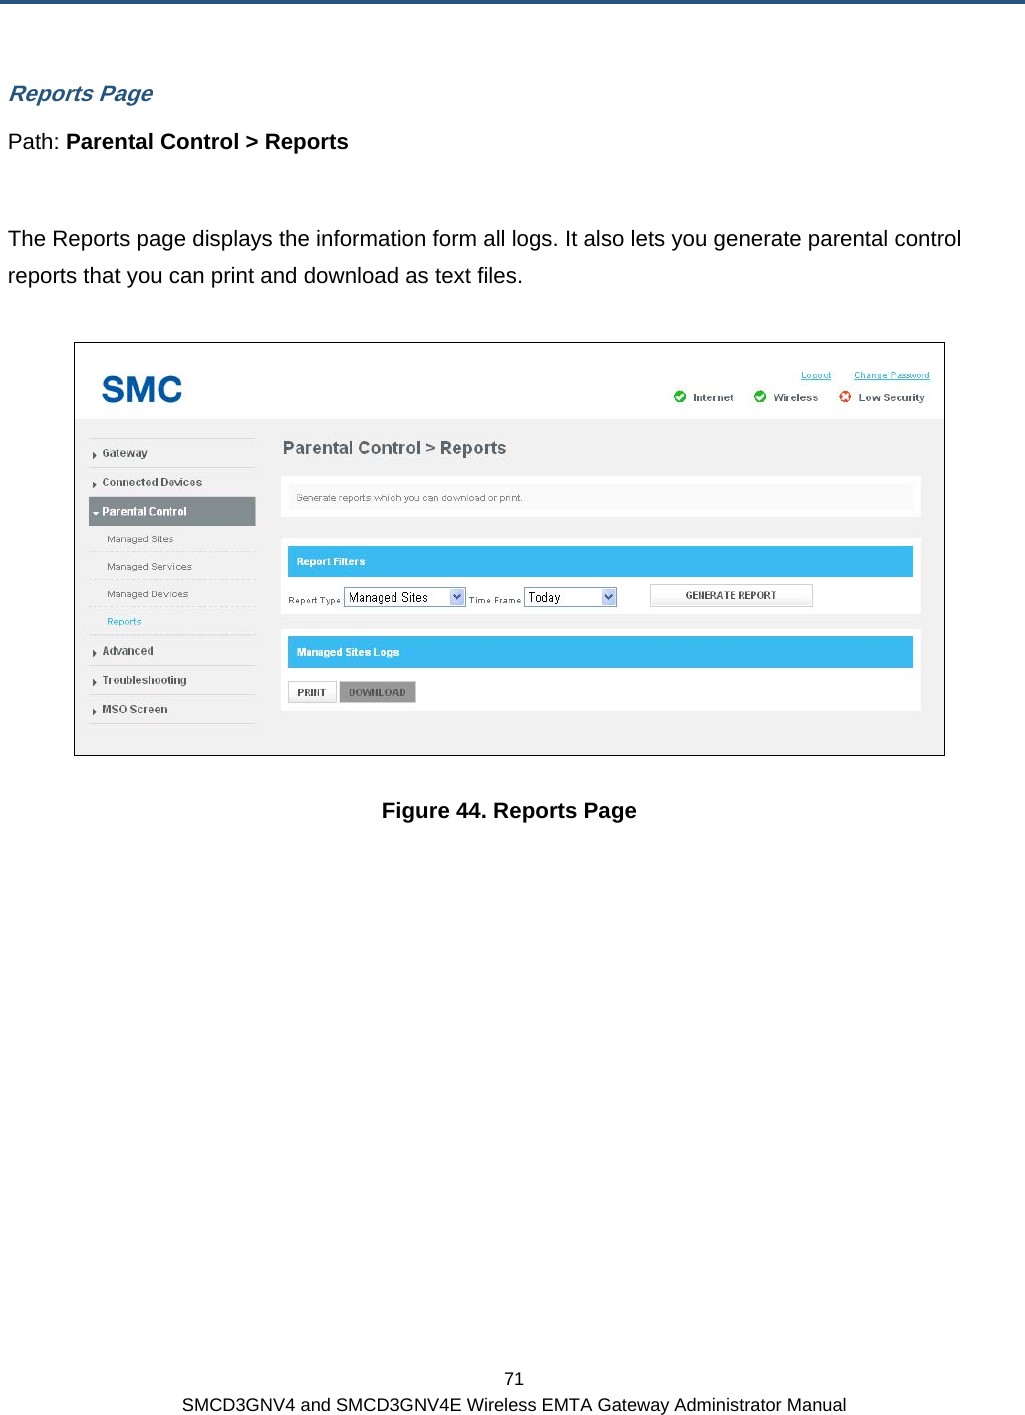  71 SMCD3GNV4 and SMCD3GNV4E Wireless EMTA Gateway Administrator Manual Reports Page Path: Parental Control &gt; Reports  The Reports page displays the information form all logs. It also lets you generate parental control reports that you can print and download as text files.  Figure 44. Reports Page 